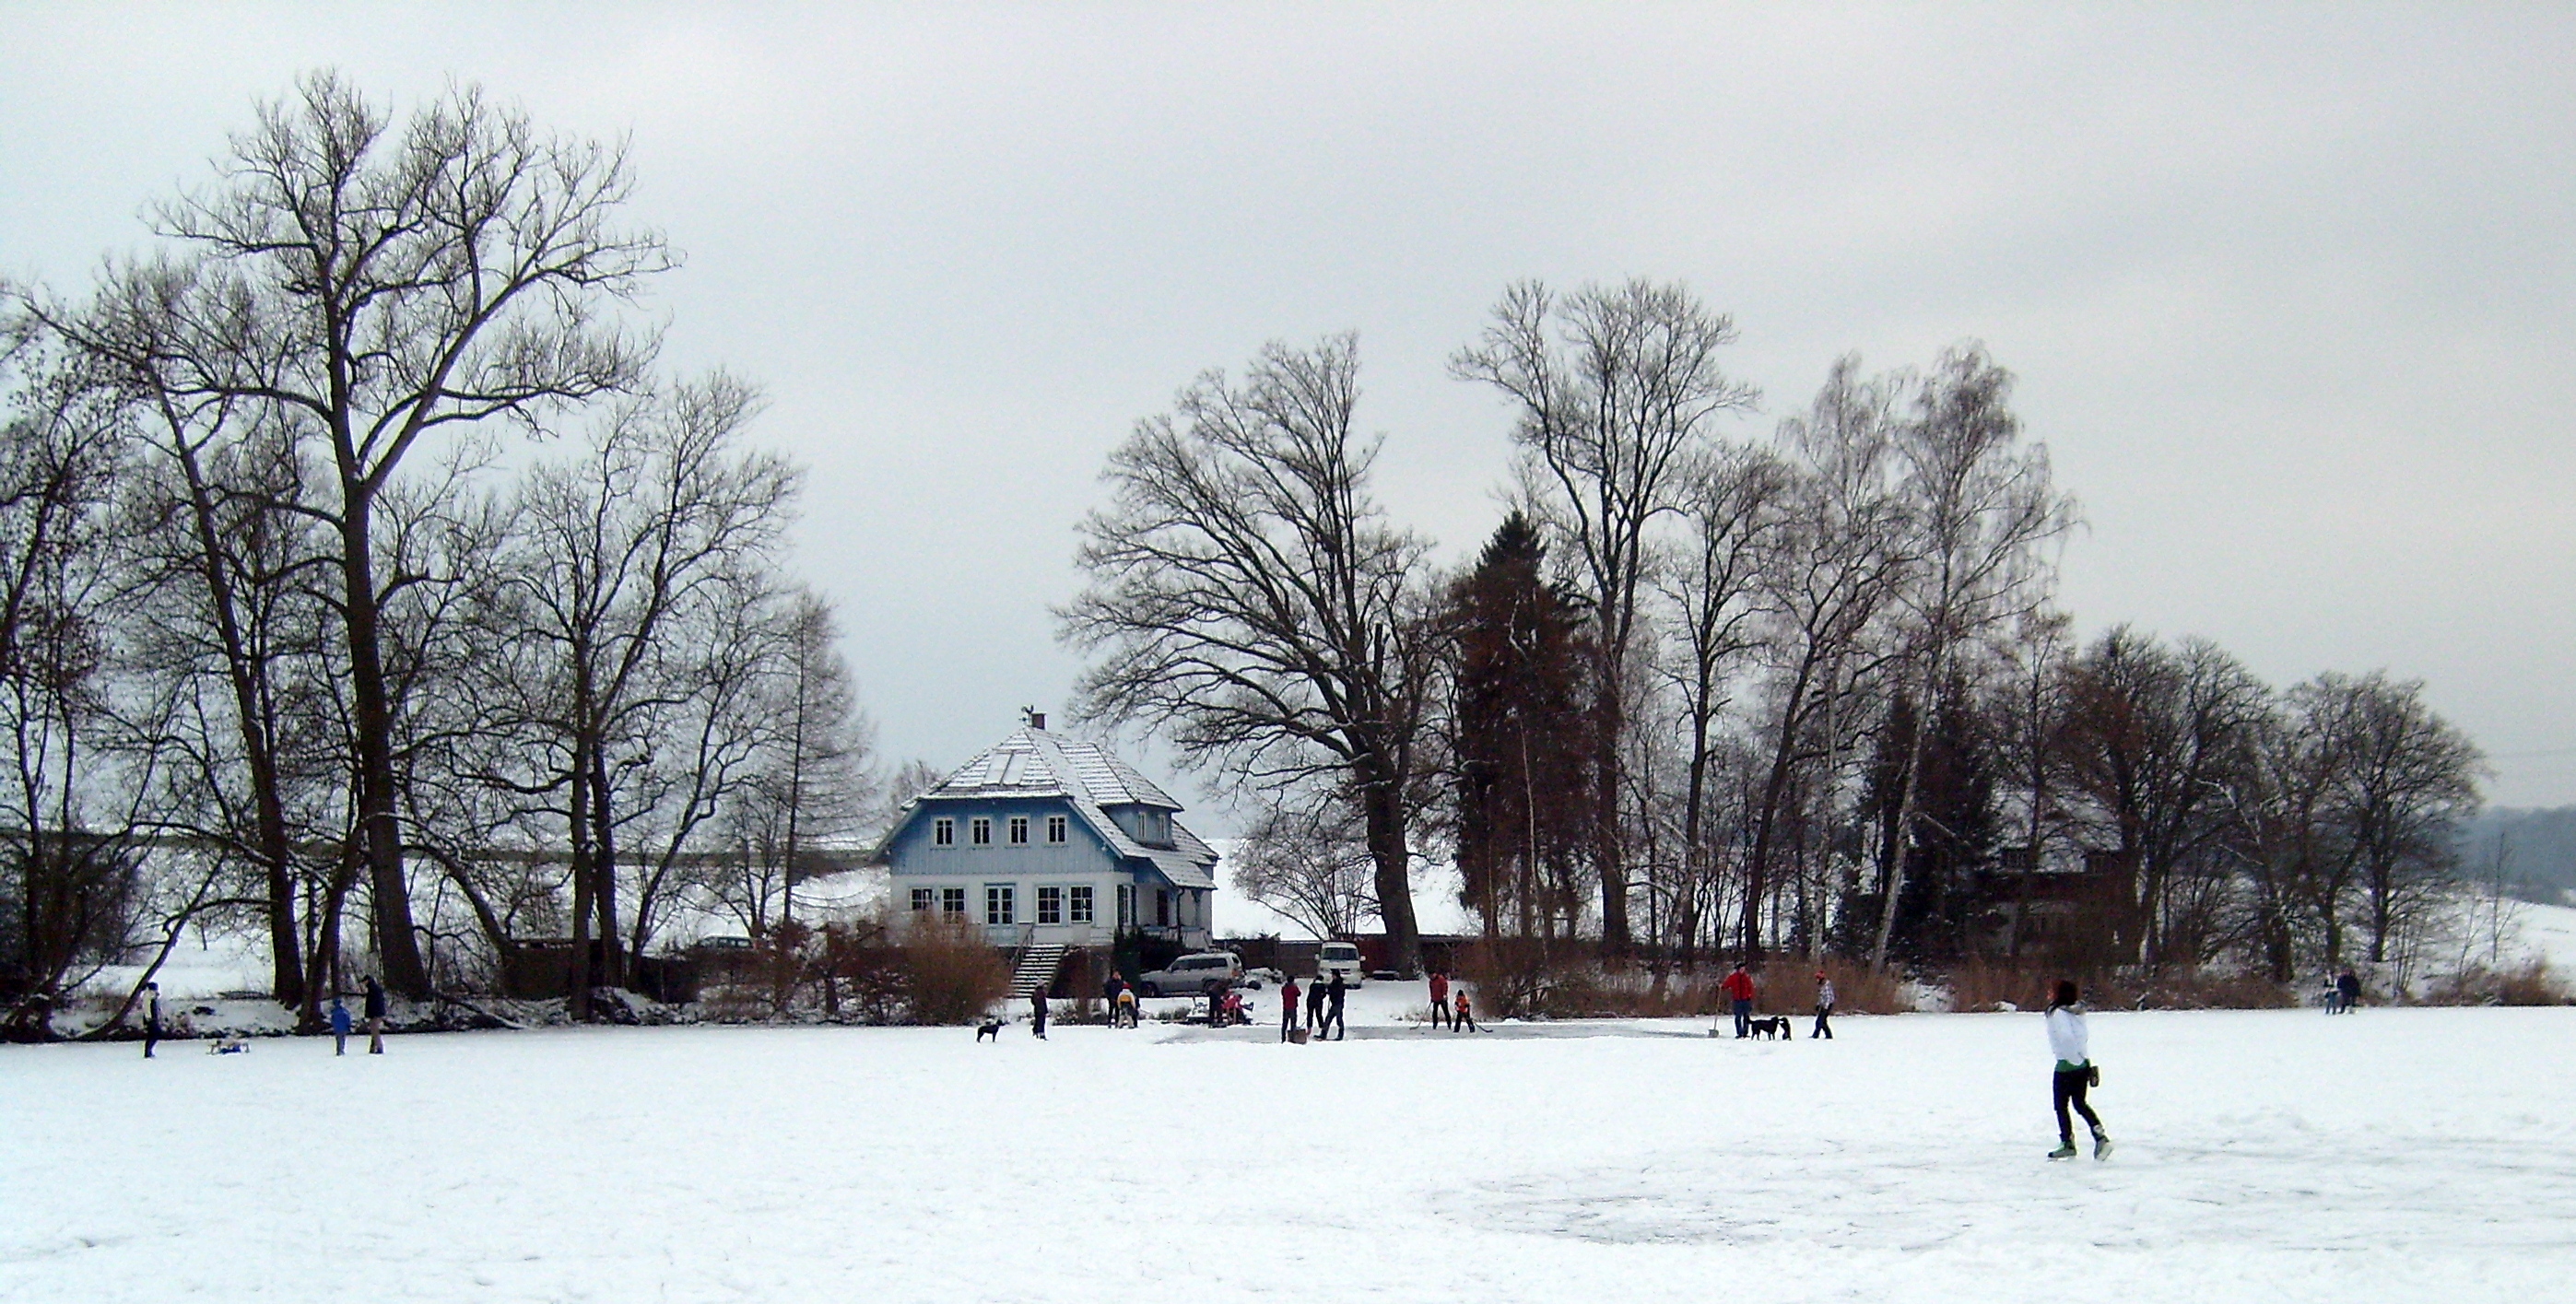 File:Aalkistensee THE LAKE HOUSE.jpg - Wikipedia, the free ...